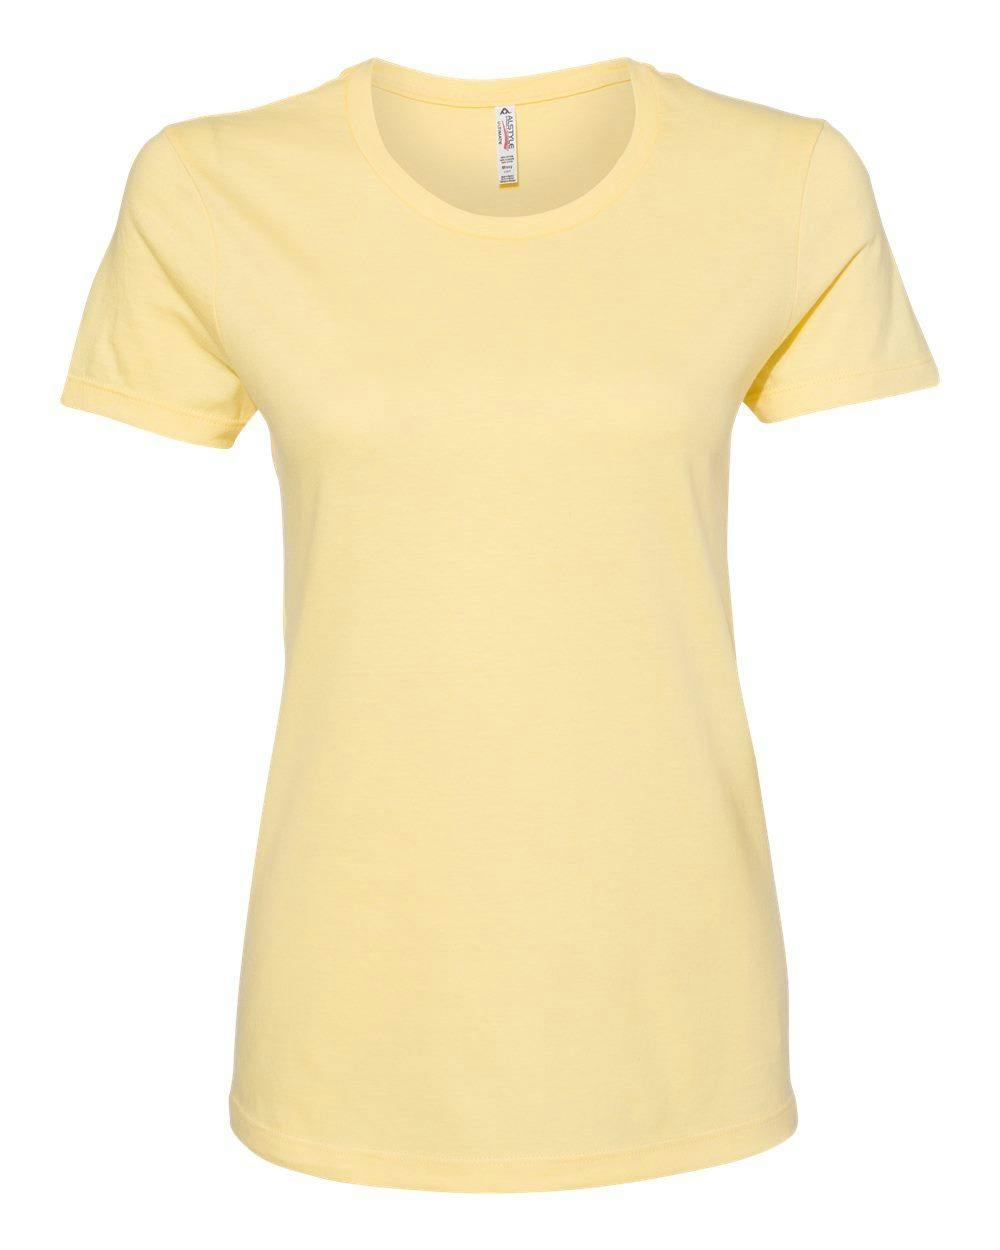 Image for Women’s Ultimate T-Shirt - 2562